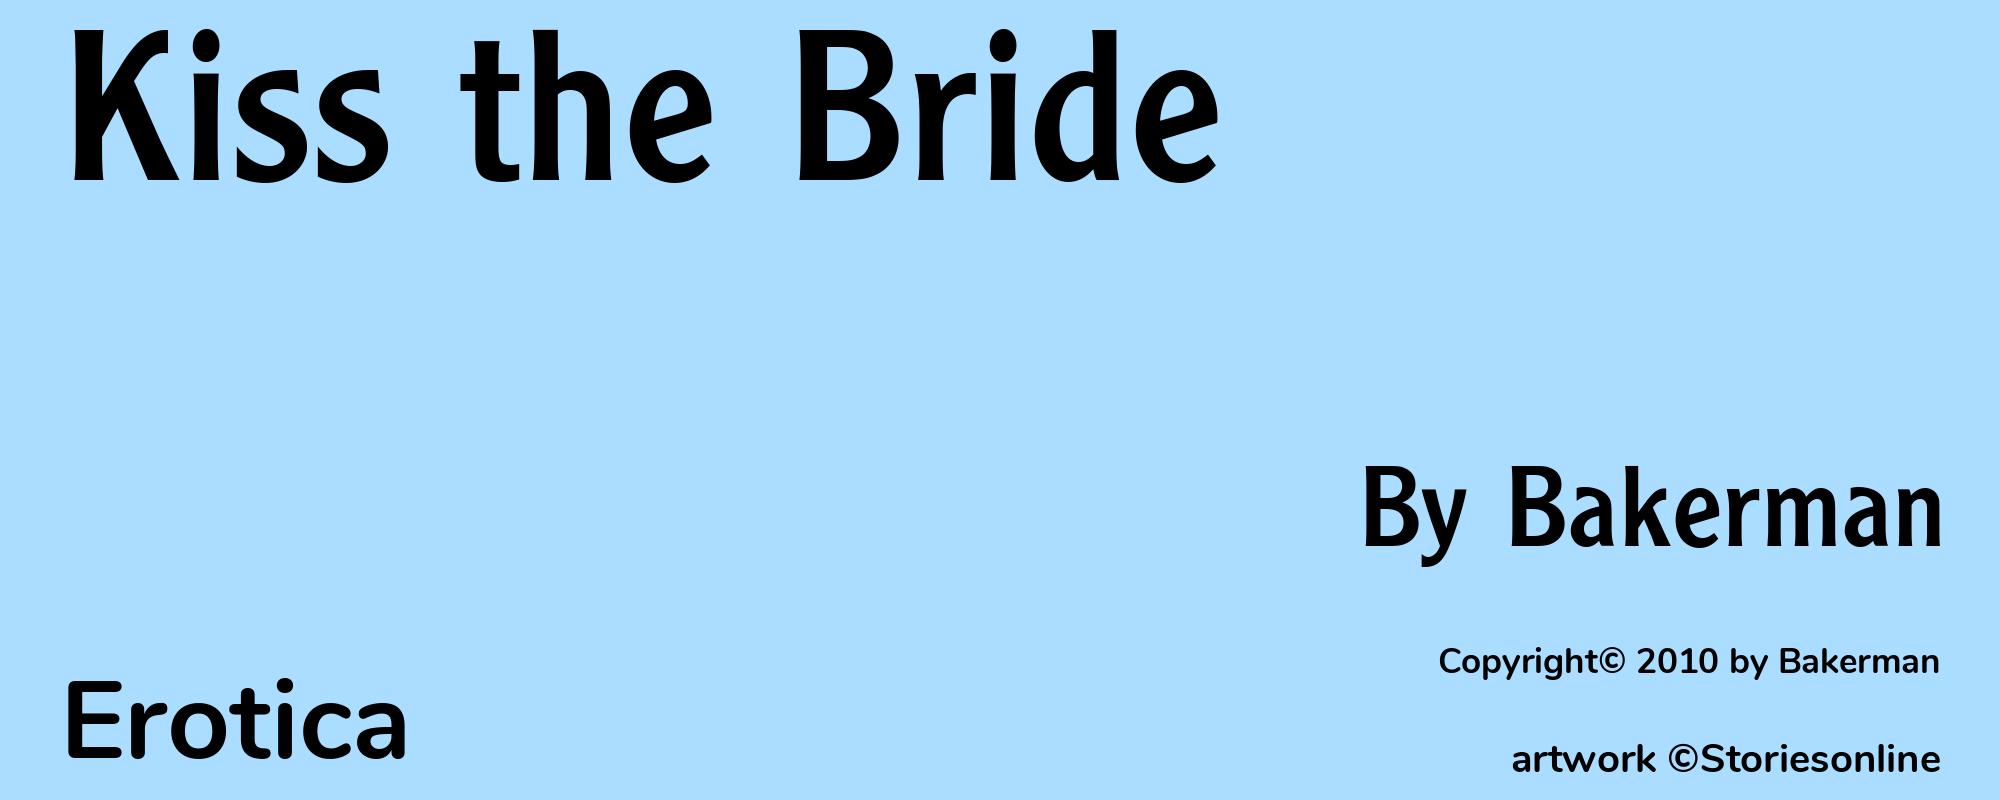 Kiss the Bride - Cover